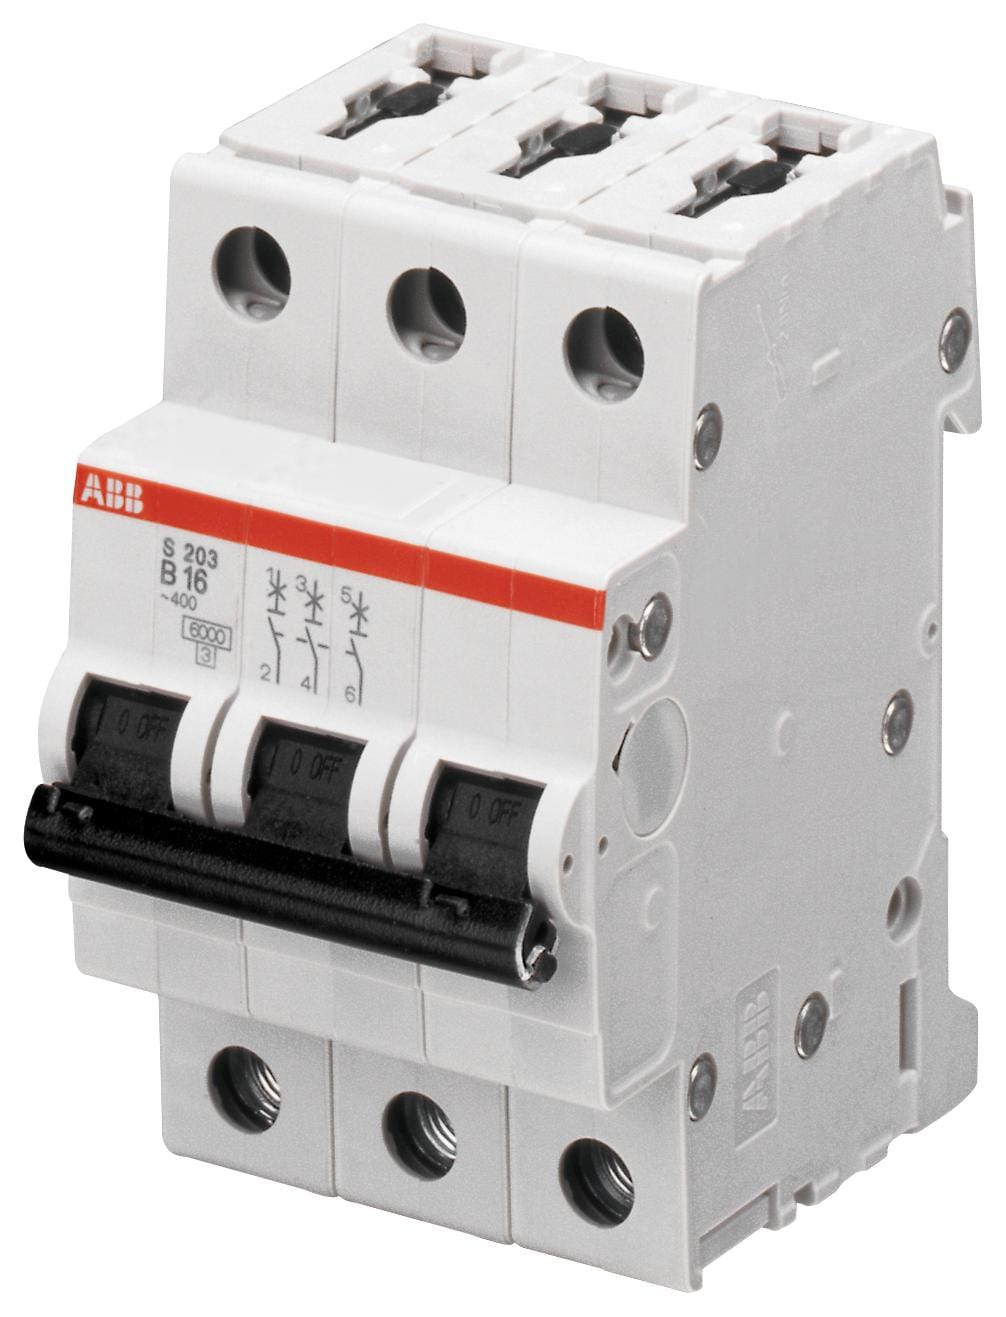 ABB Thermal Magnetic S203-D20 CIRCUIT BREAKER, THERMAL MAG, 3 POLE ABB 2492841 S203-D20